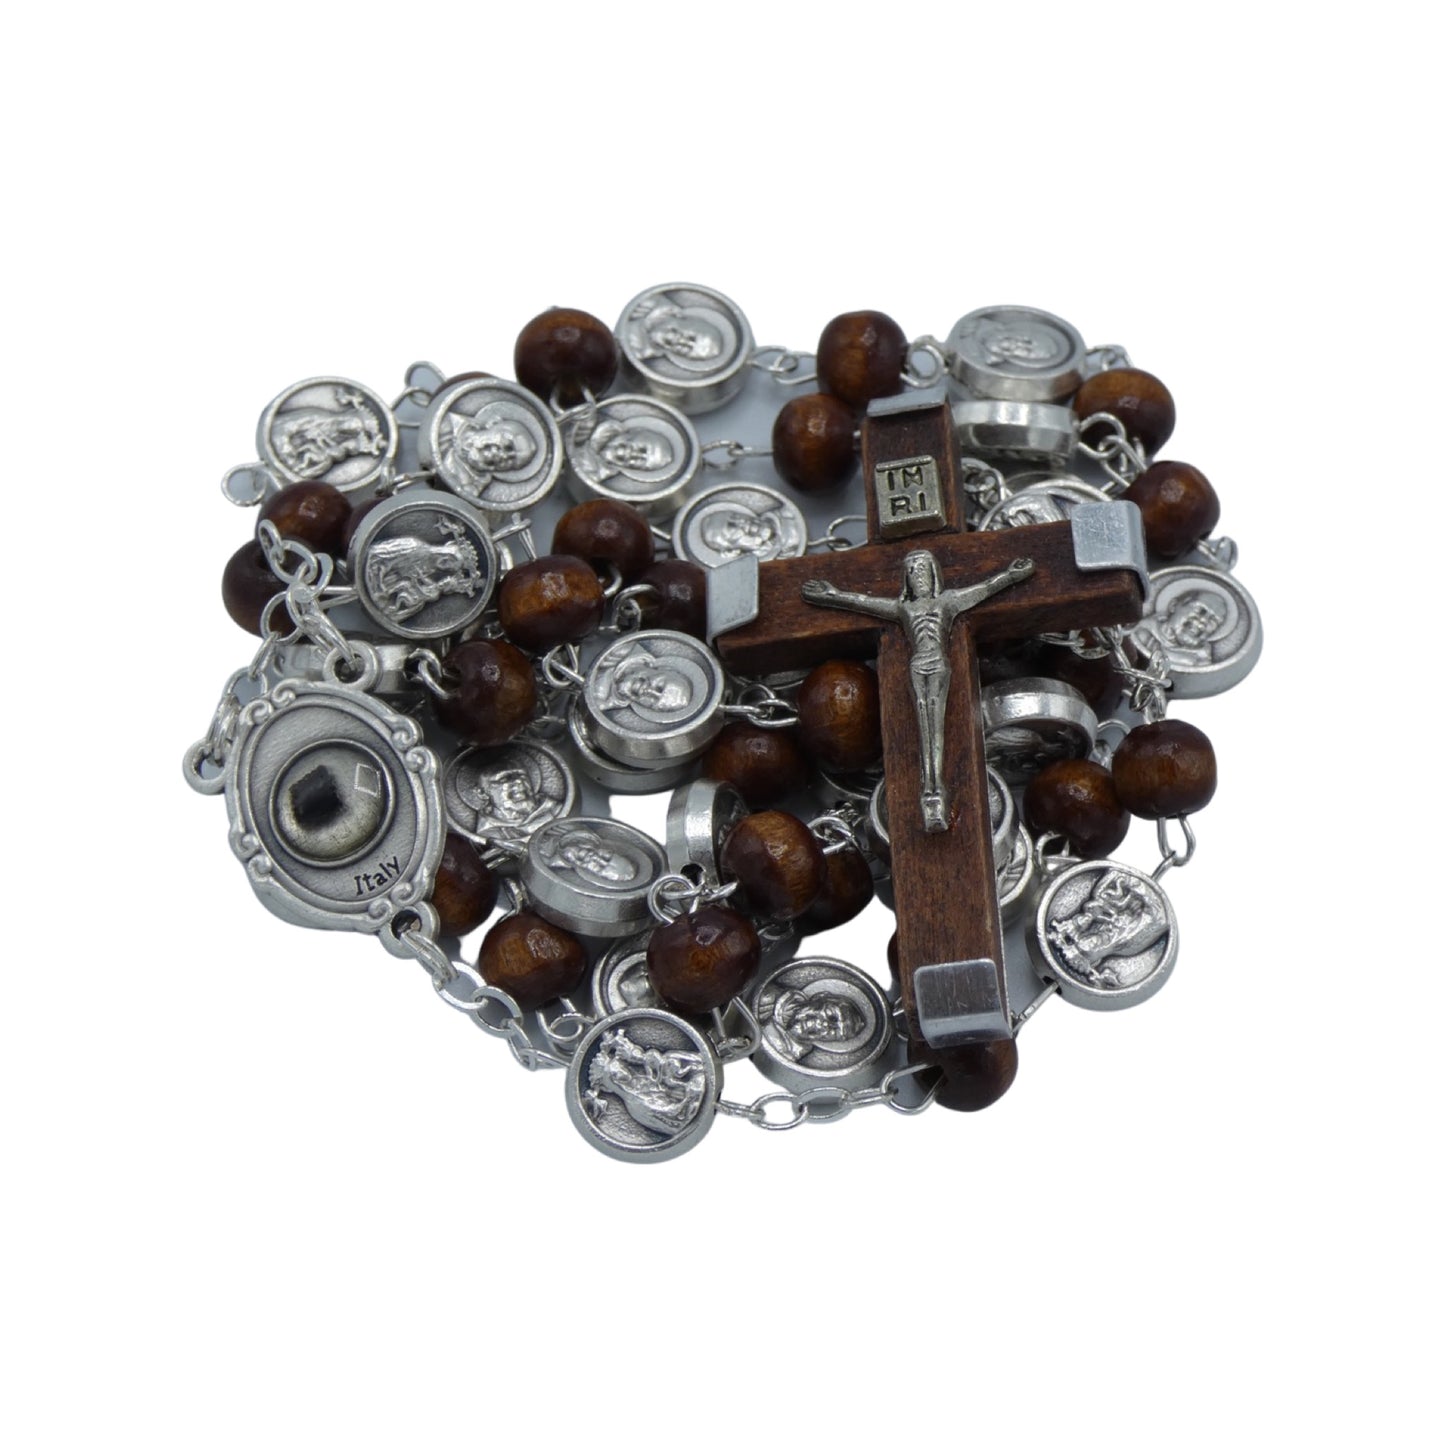 Padre Pio Medals Rosary with Relic